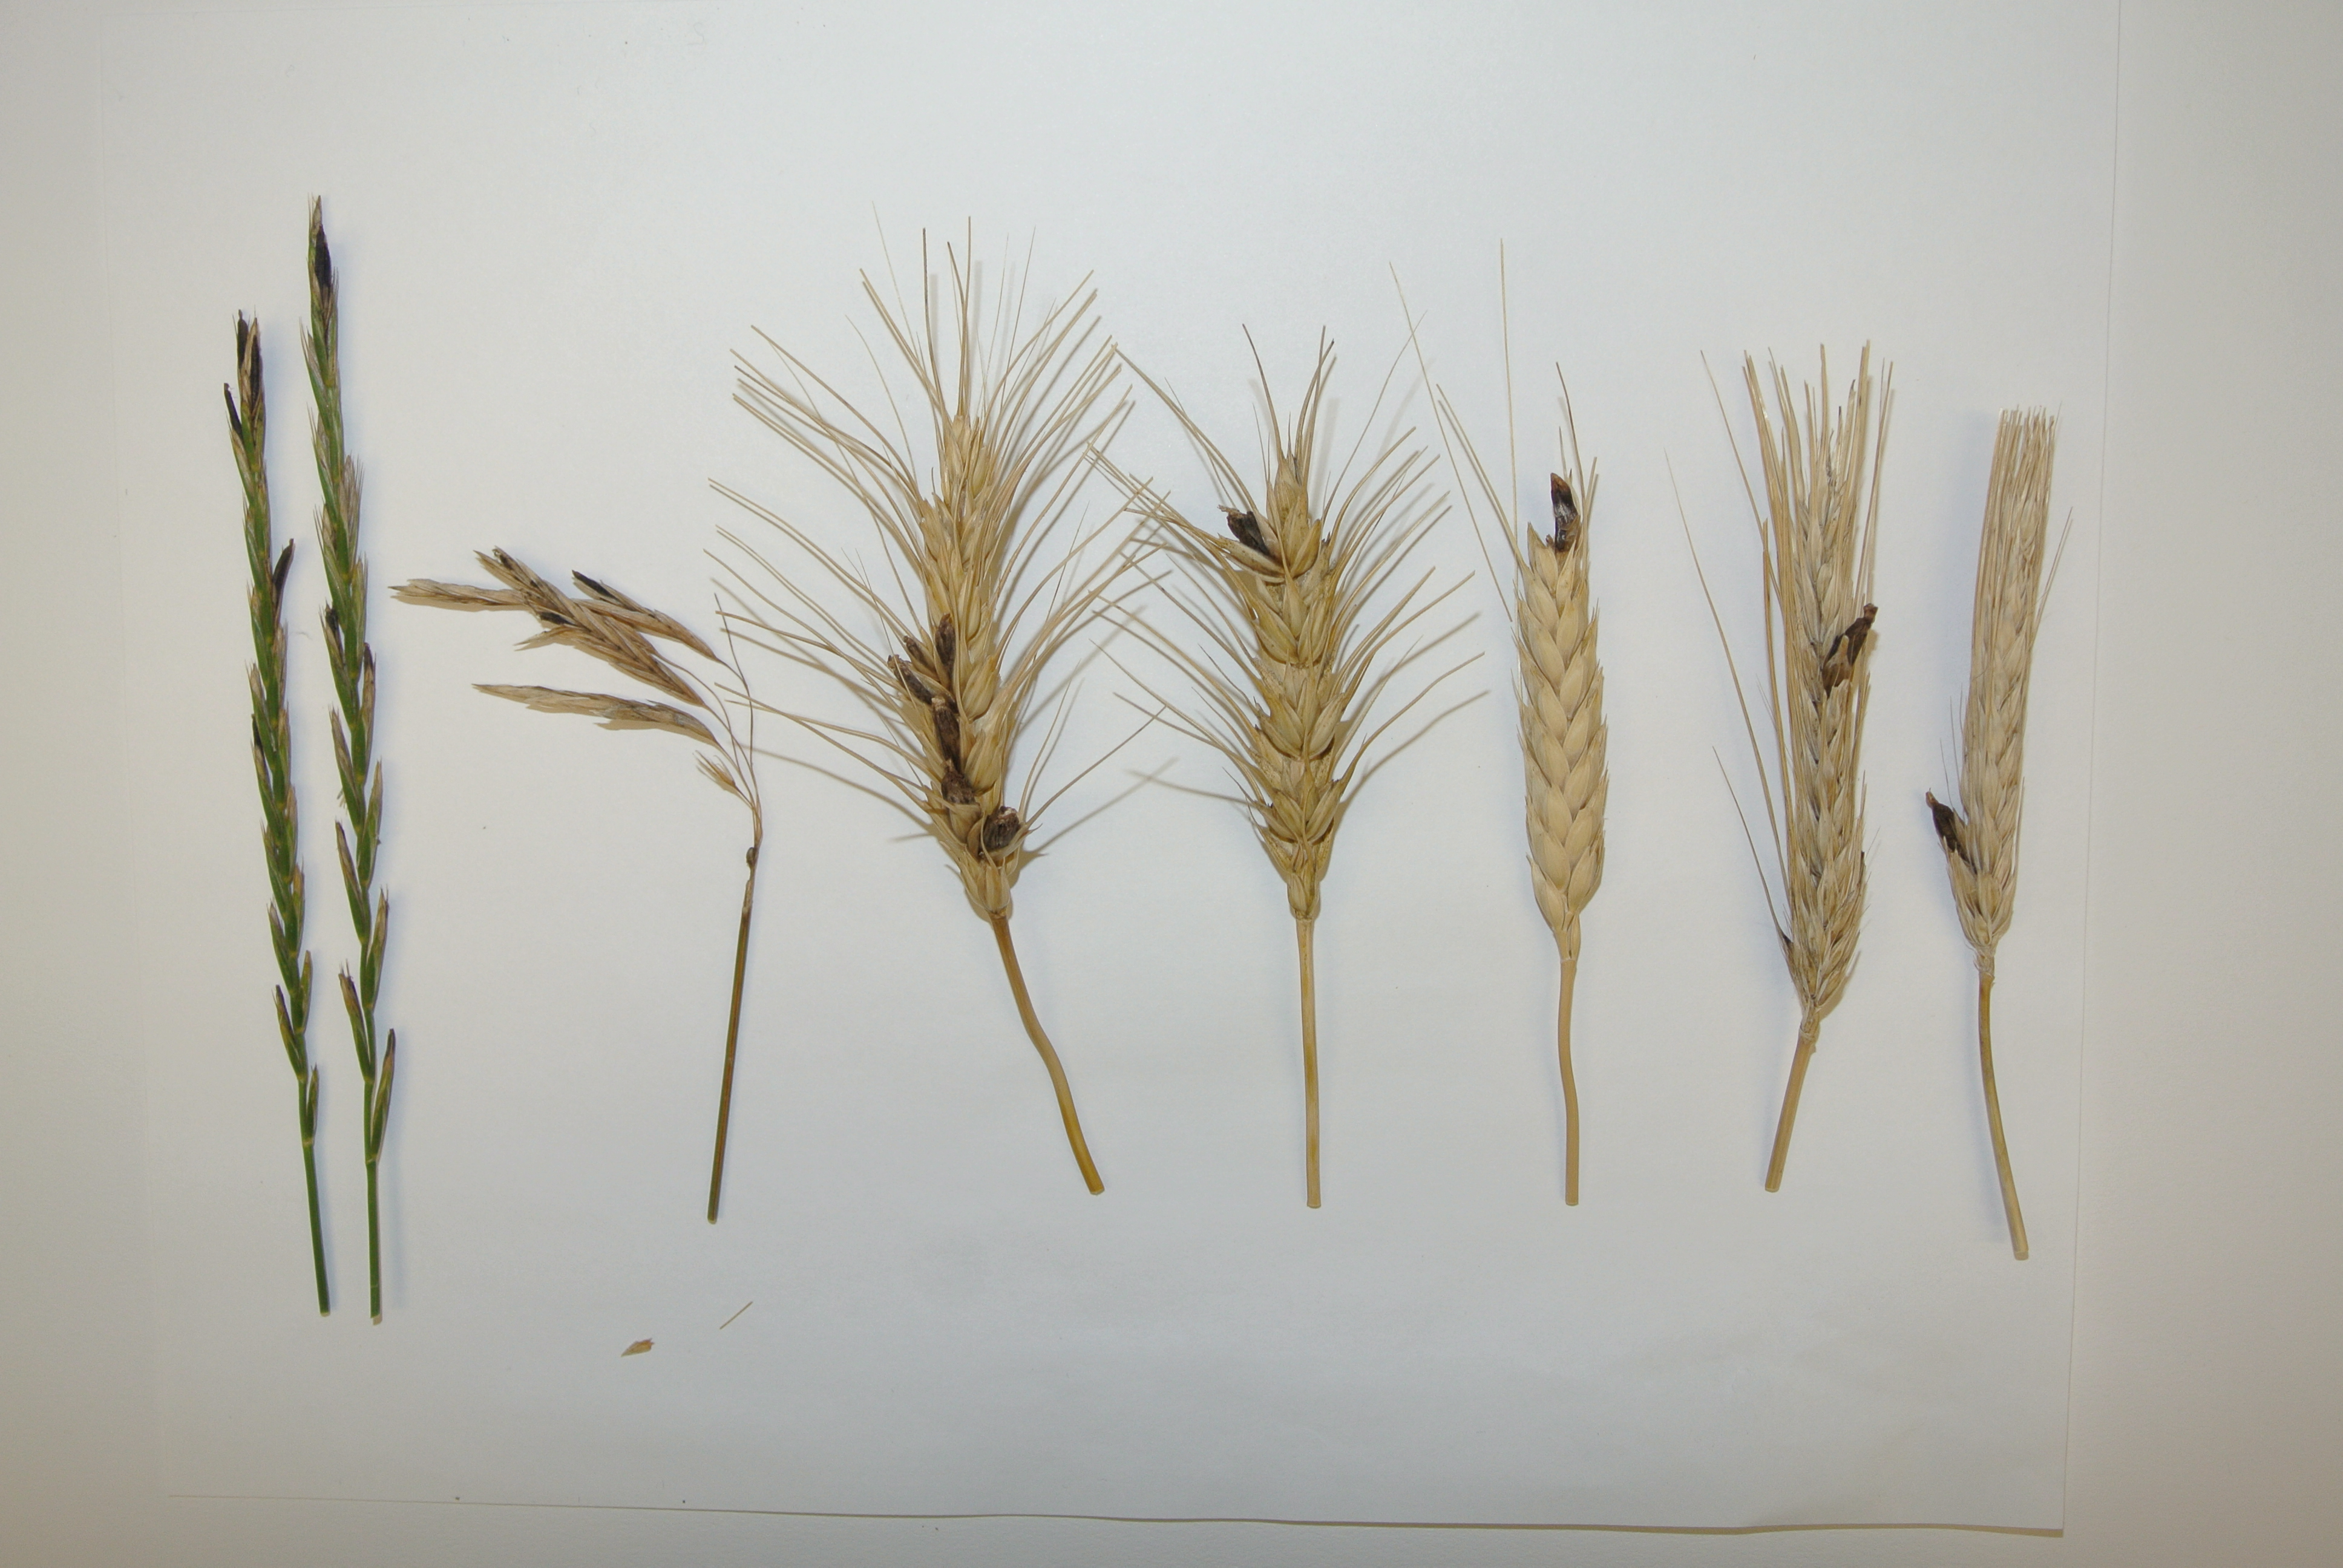 It is important to visually monitor livestock feed for the presence of ergot sclerotia, that can develop in cereal grains and a variety of grasses. (NDSU Photo)